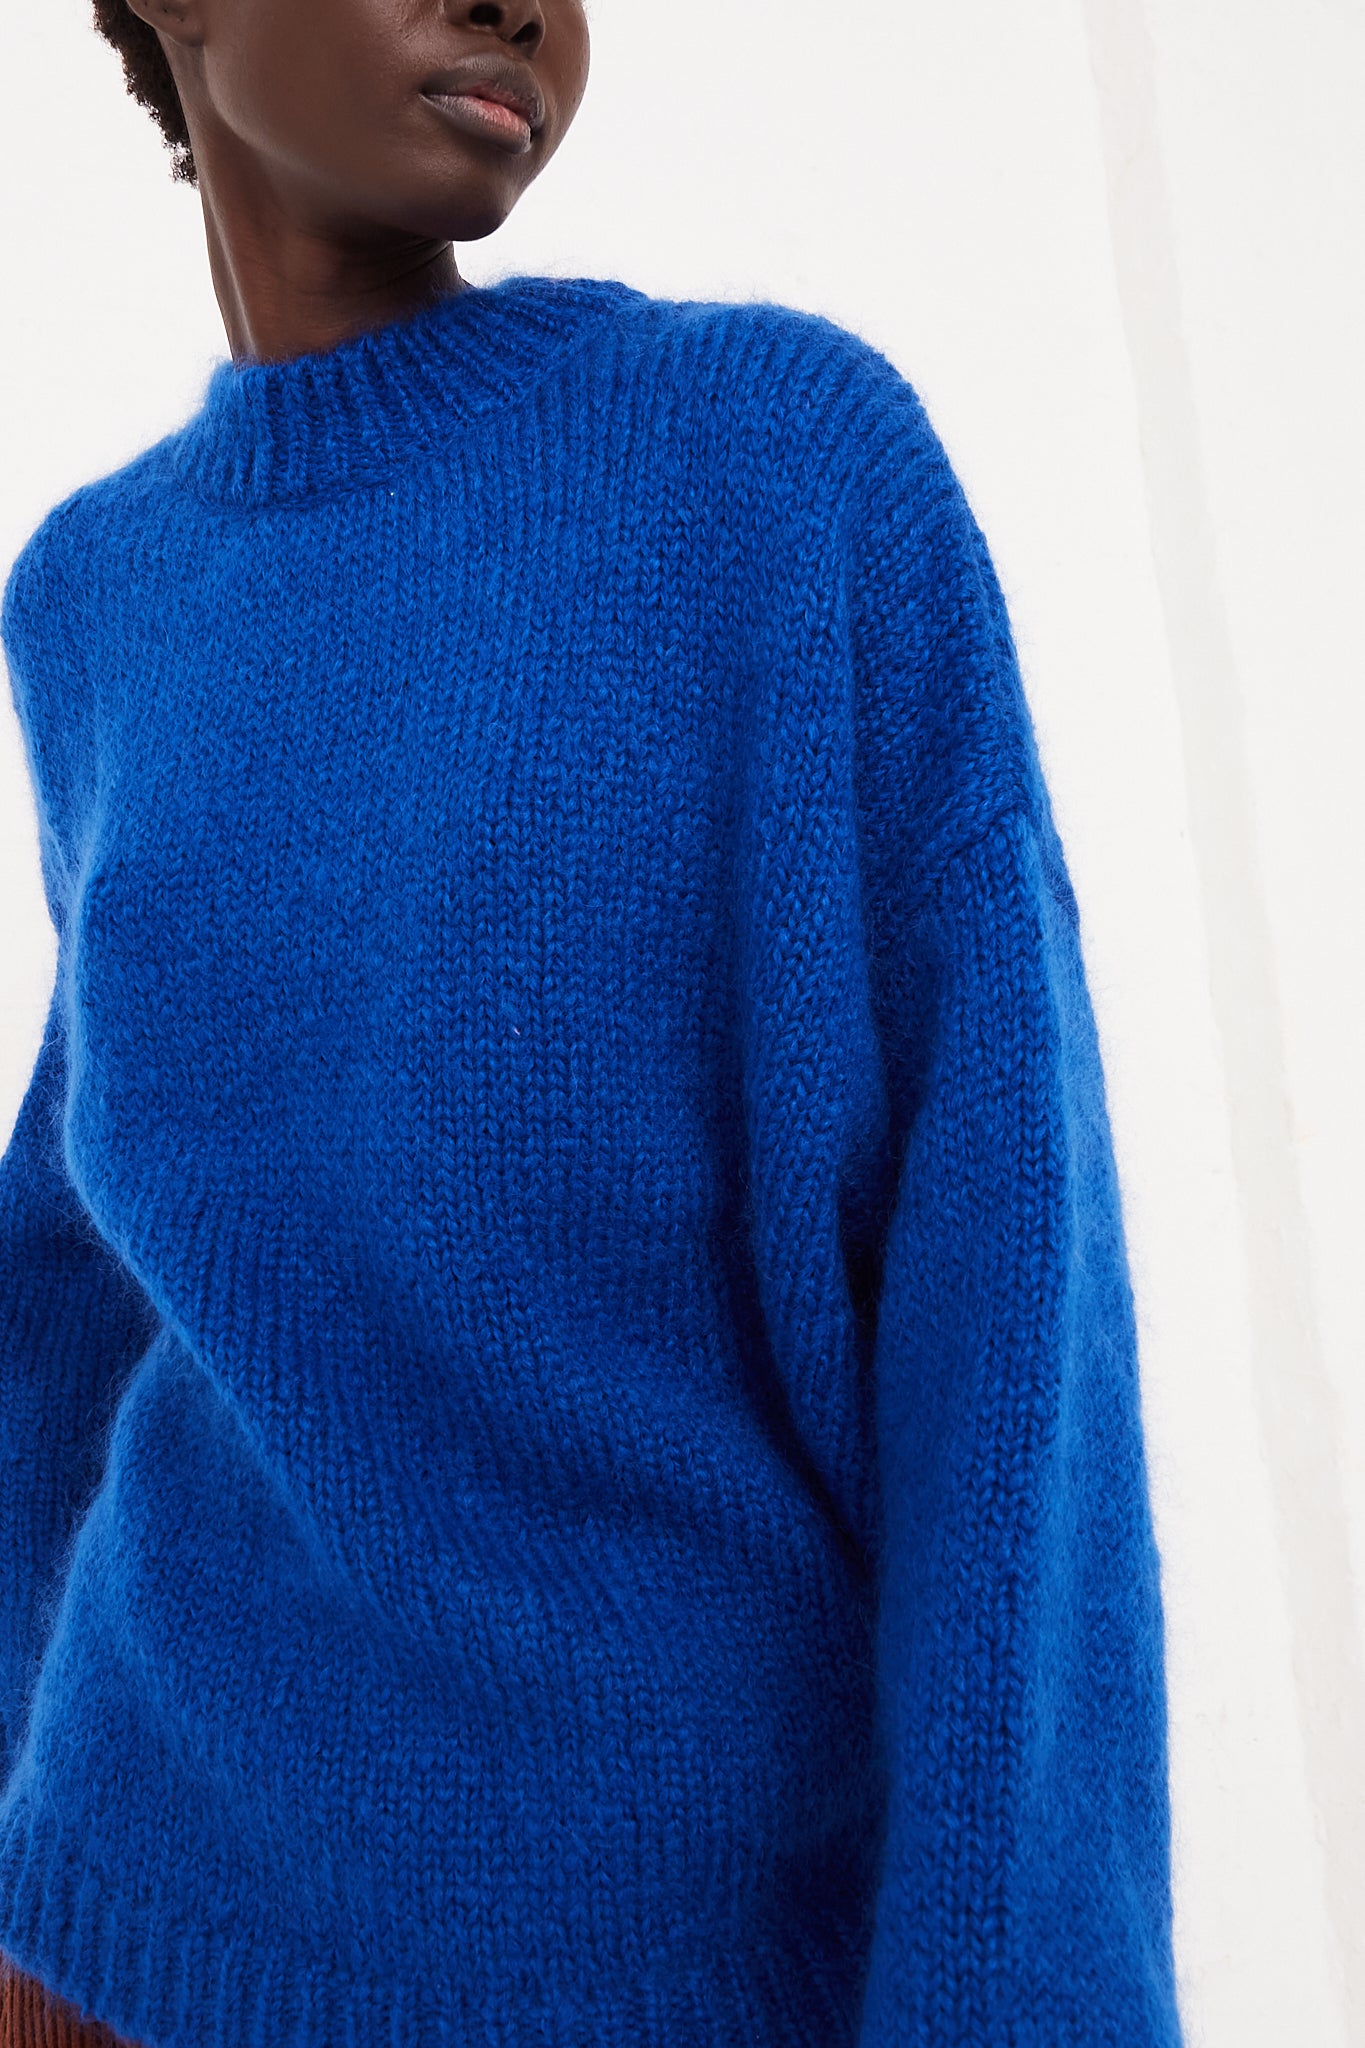 CORDERA Mohair Sweater in Blue | Oroboro Store | Front view of sweater on model